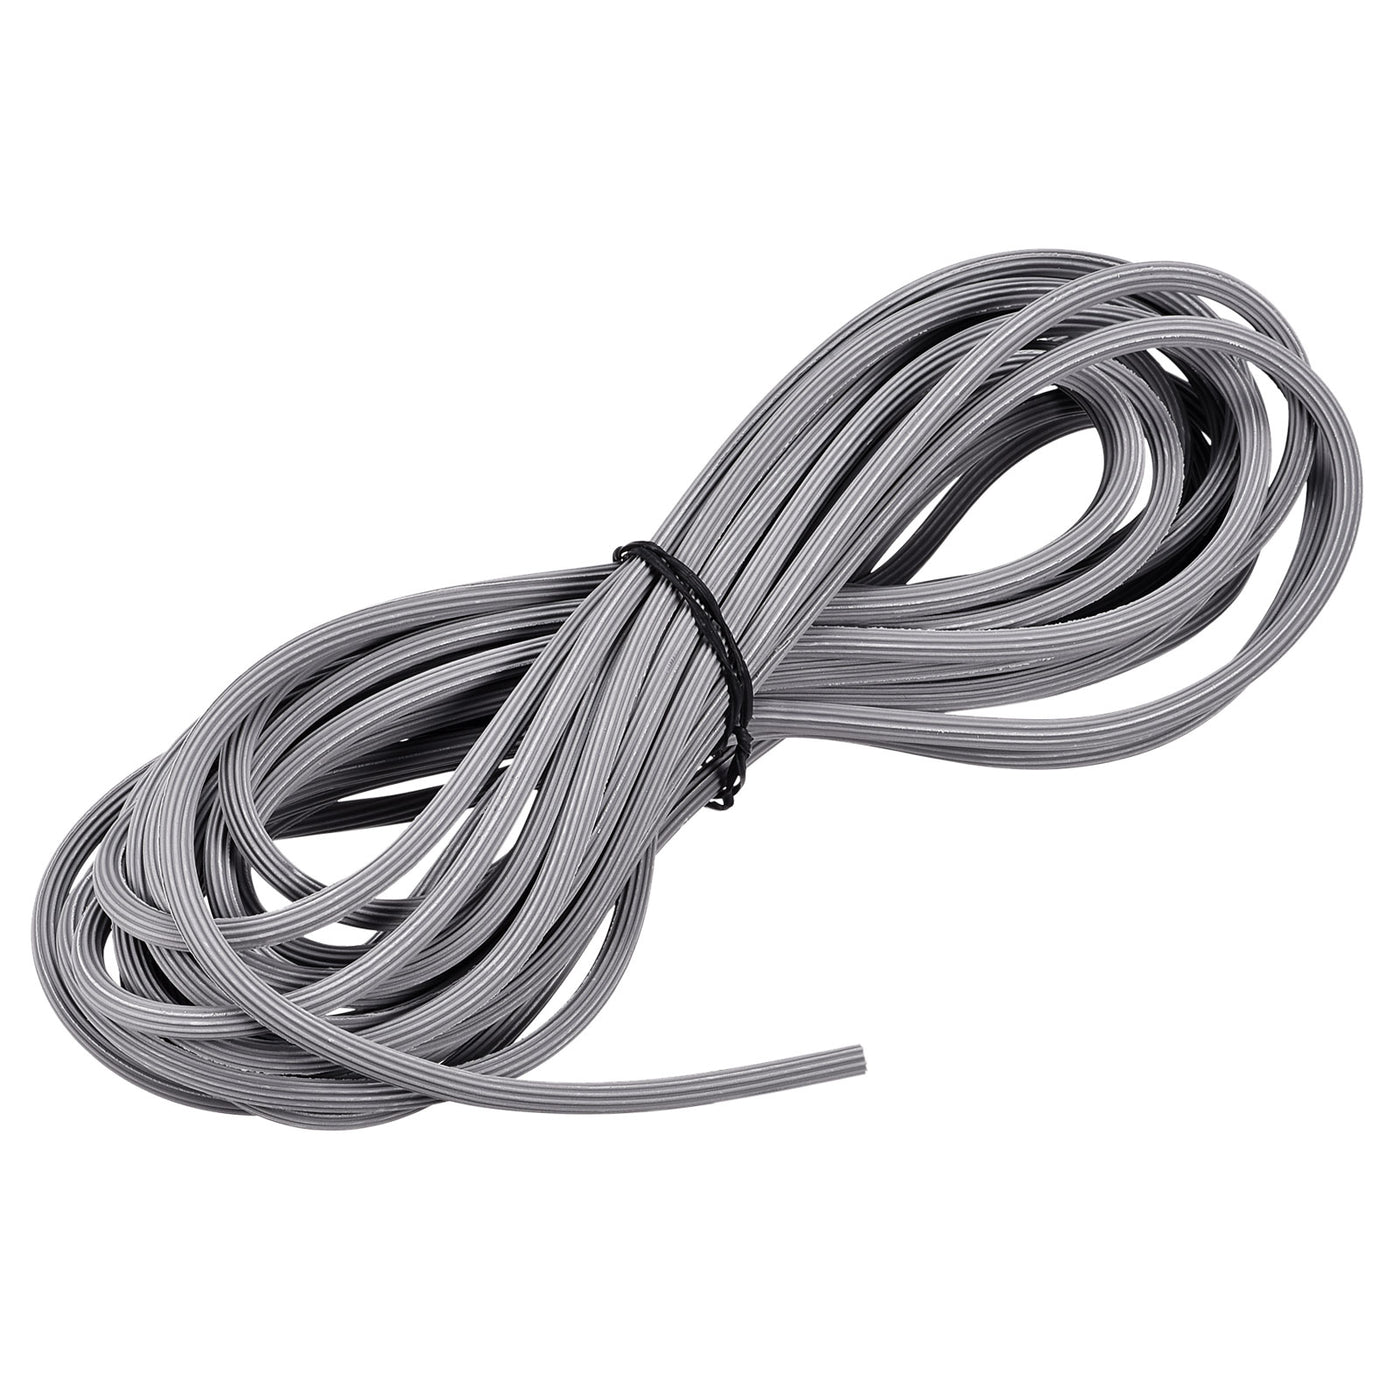 uxcell Uxcell Screen Spline 7.5M/24.61Ft Length PVC Sealing Strip Retainer, 5mm OD Gray